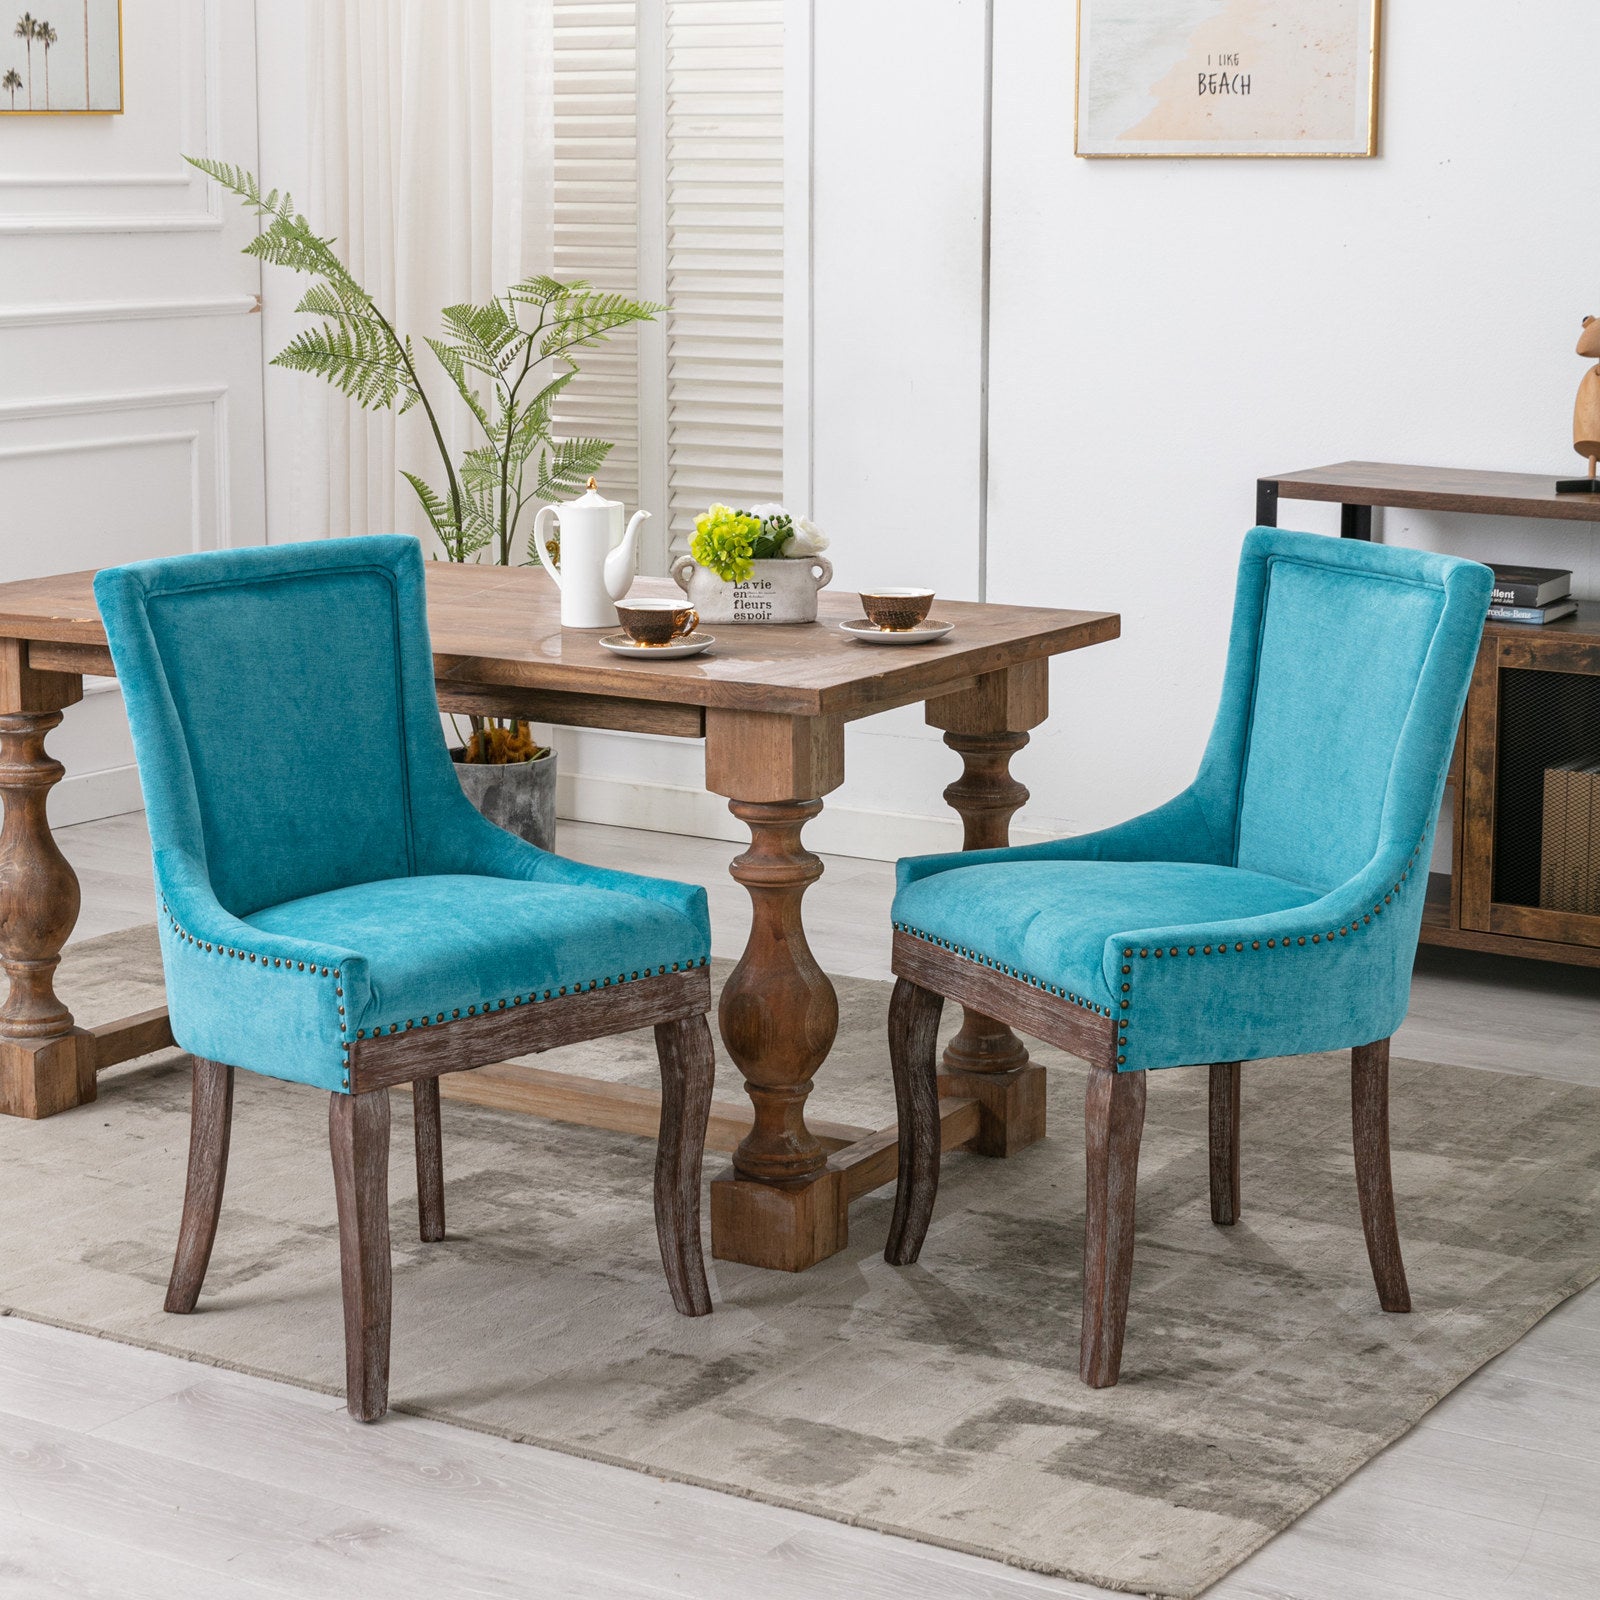 Ultra Side Dining Chair Blue